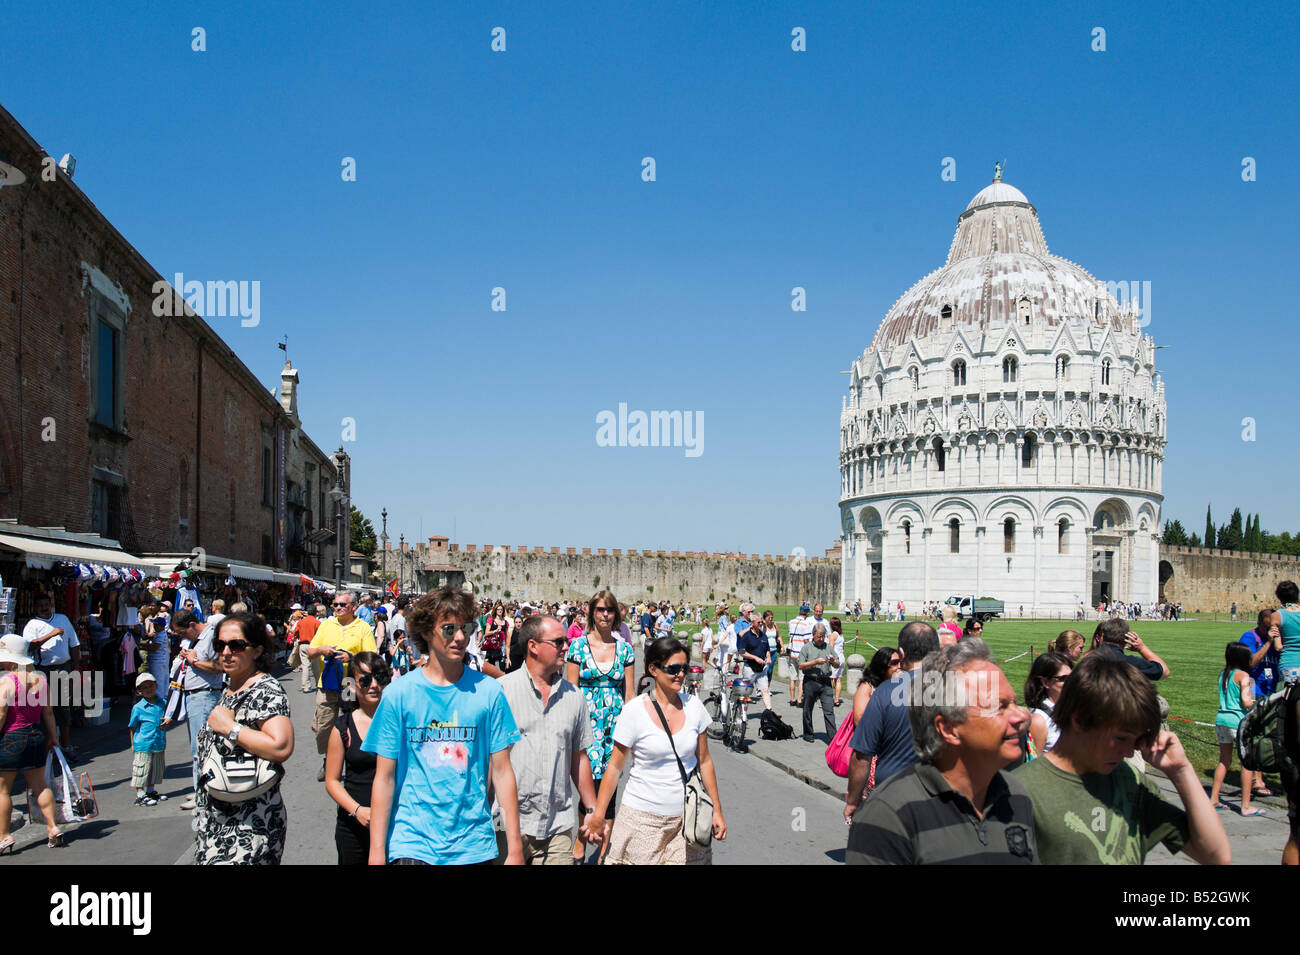 The Baptistry and market stalls in the Piazza dei Miracoli, Pisa, Tuscany, Italy Stock Photo